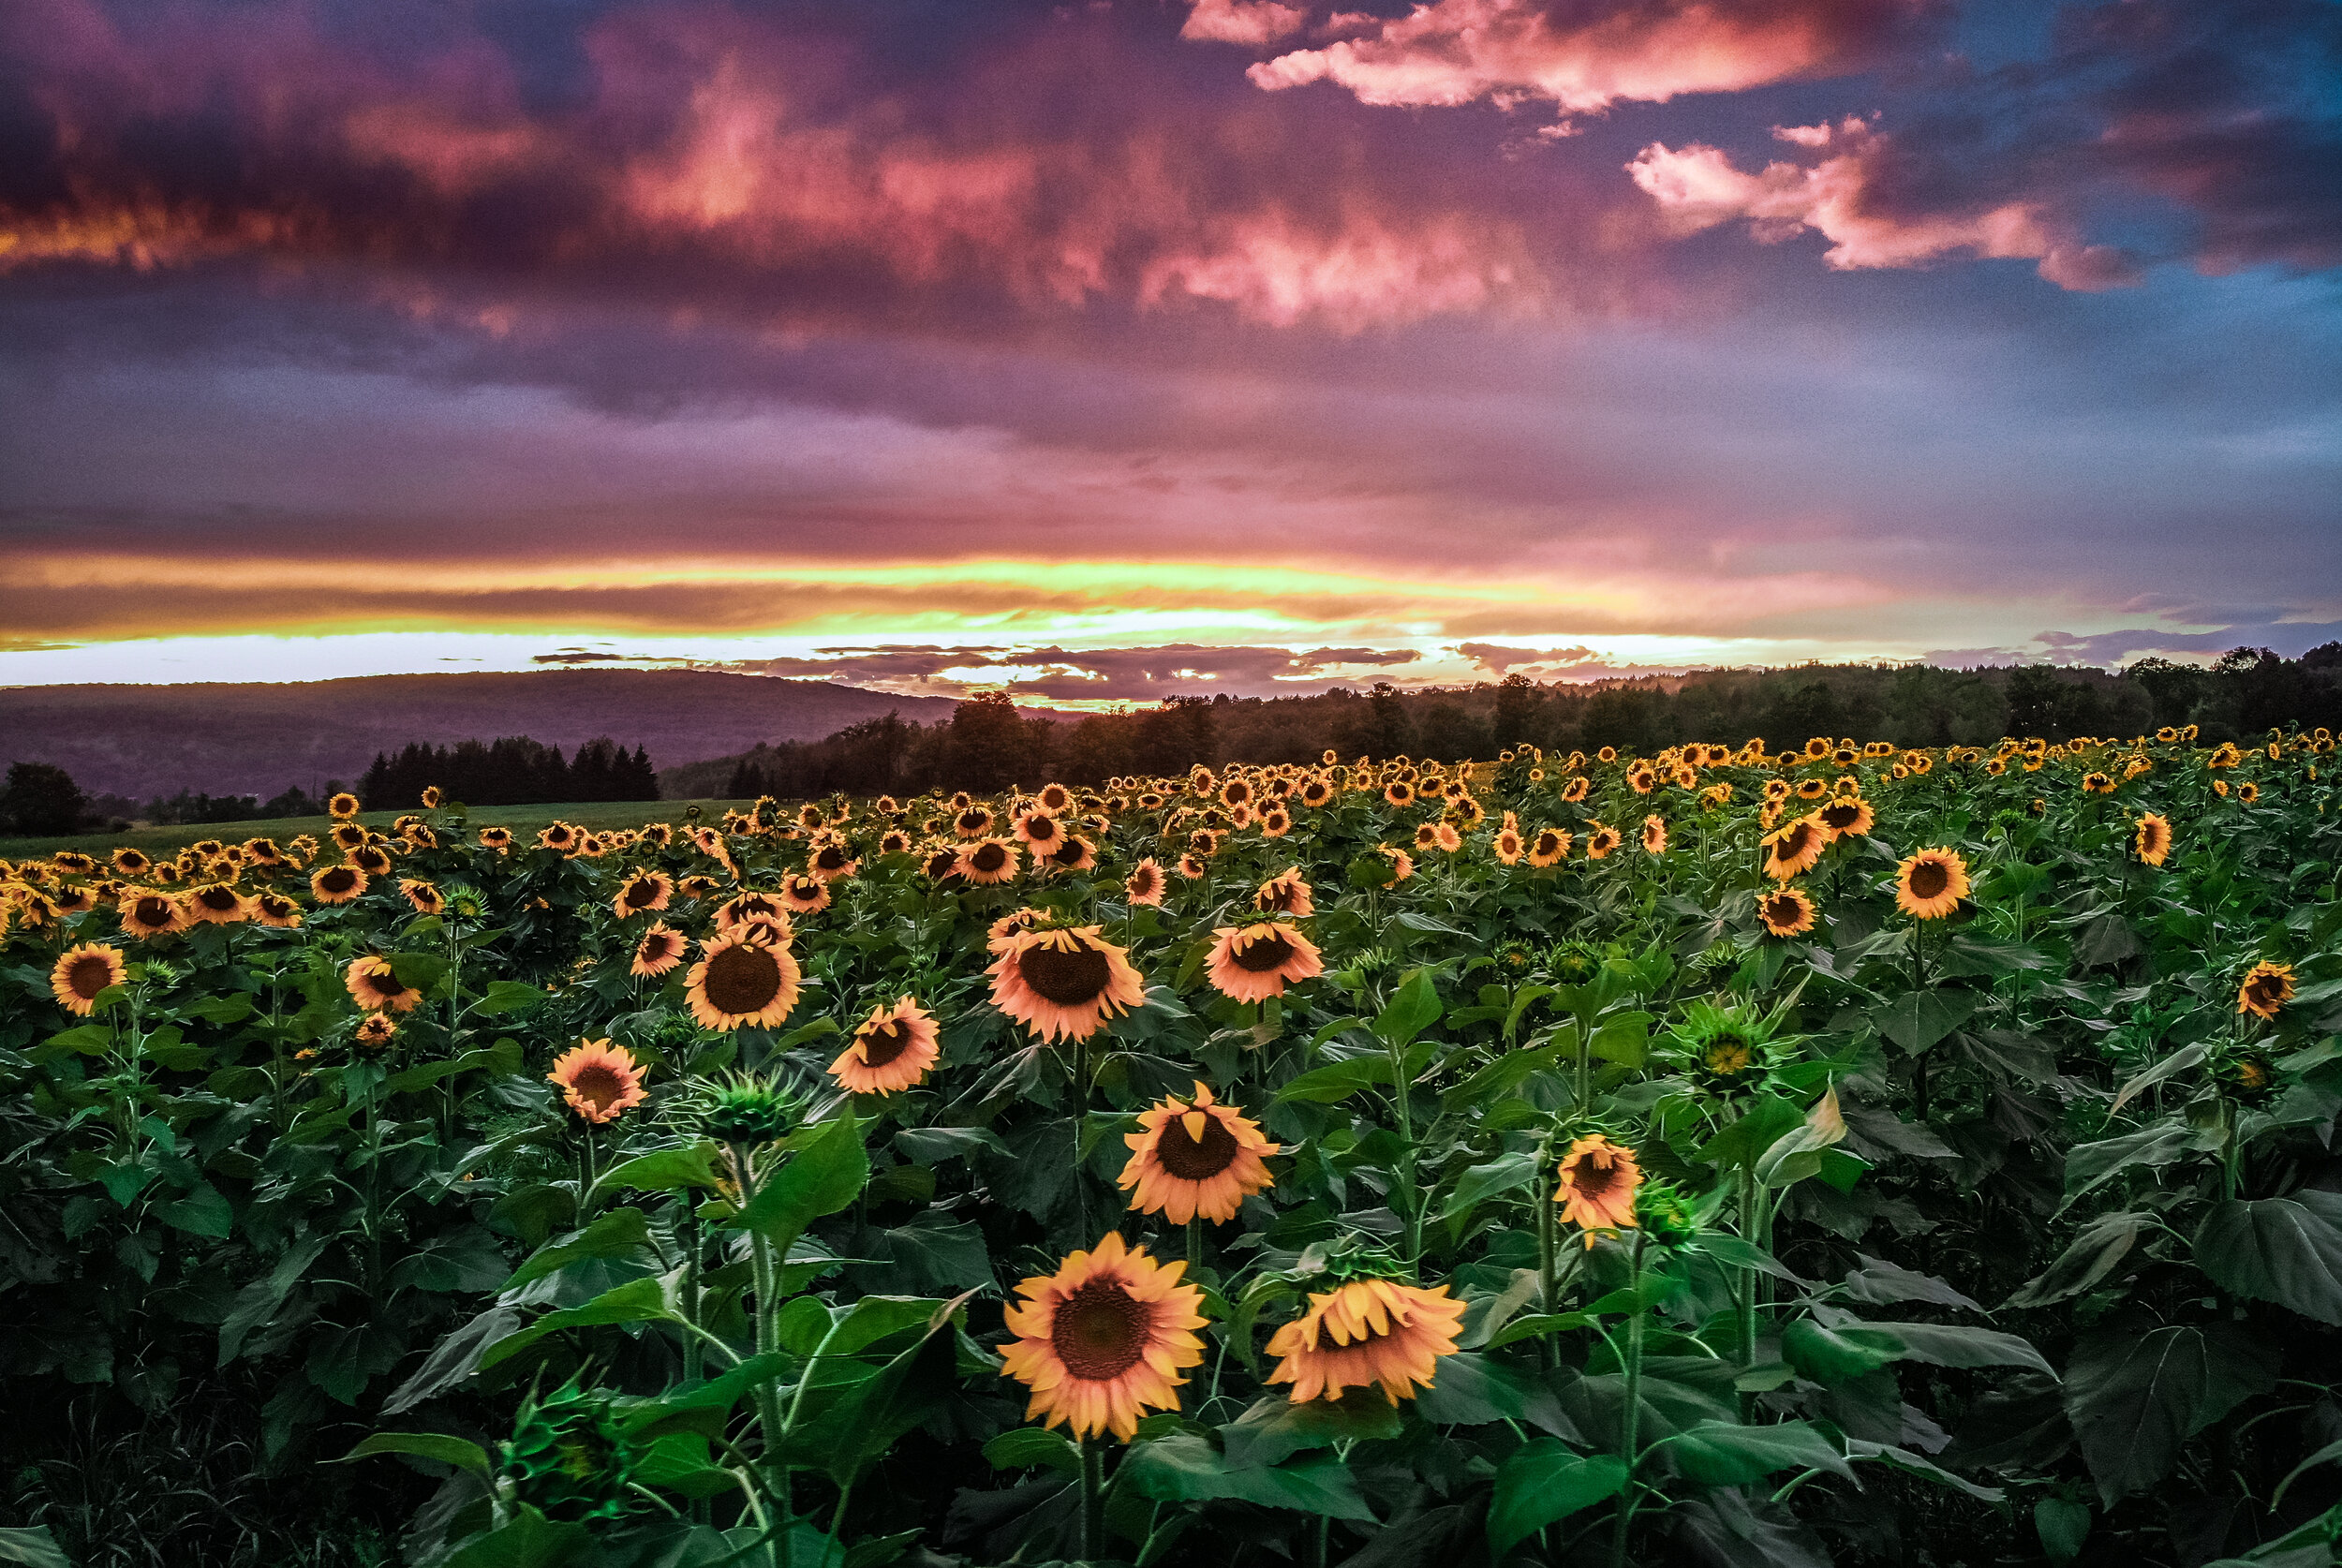 A field of Sunflowers in Vermont